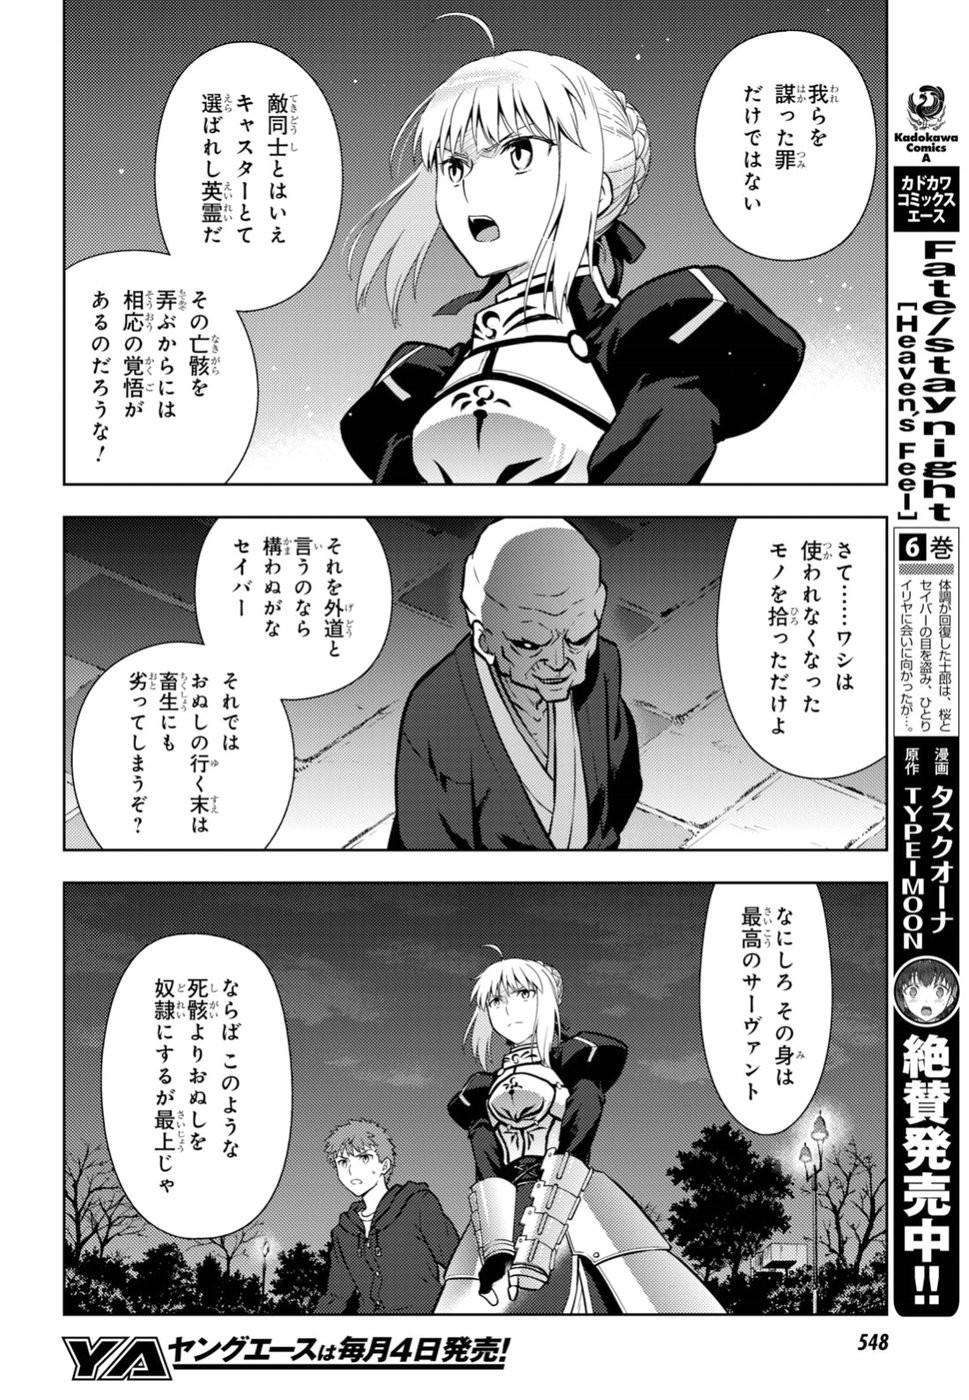 Fate/Stay night Heaven's Feel - Chapter 44 - Page 8